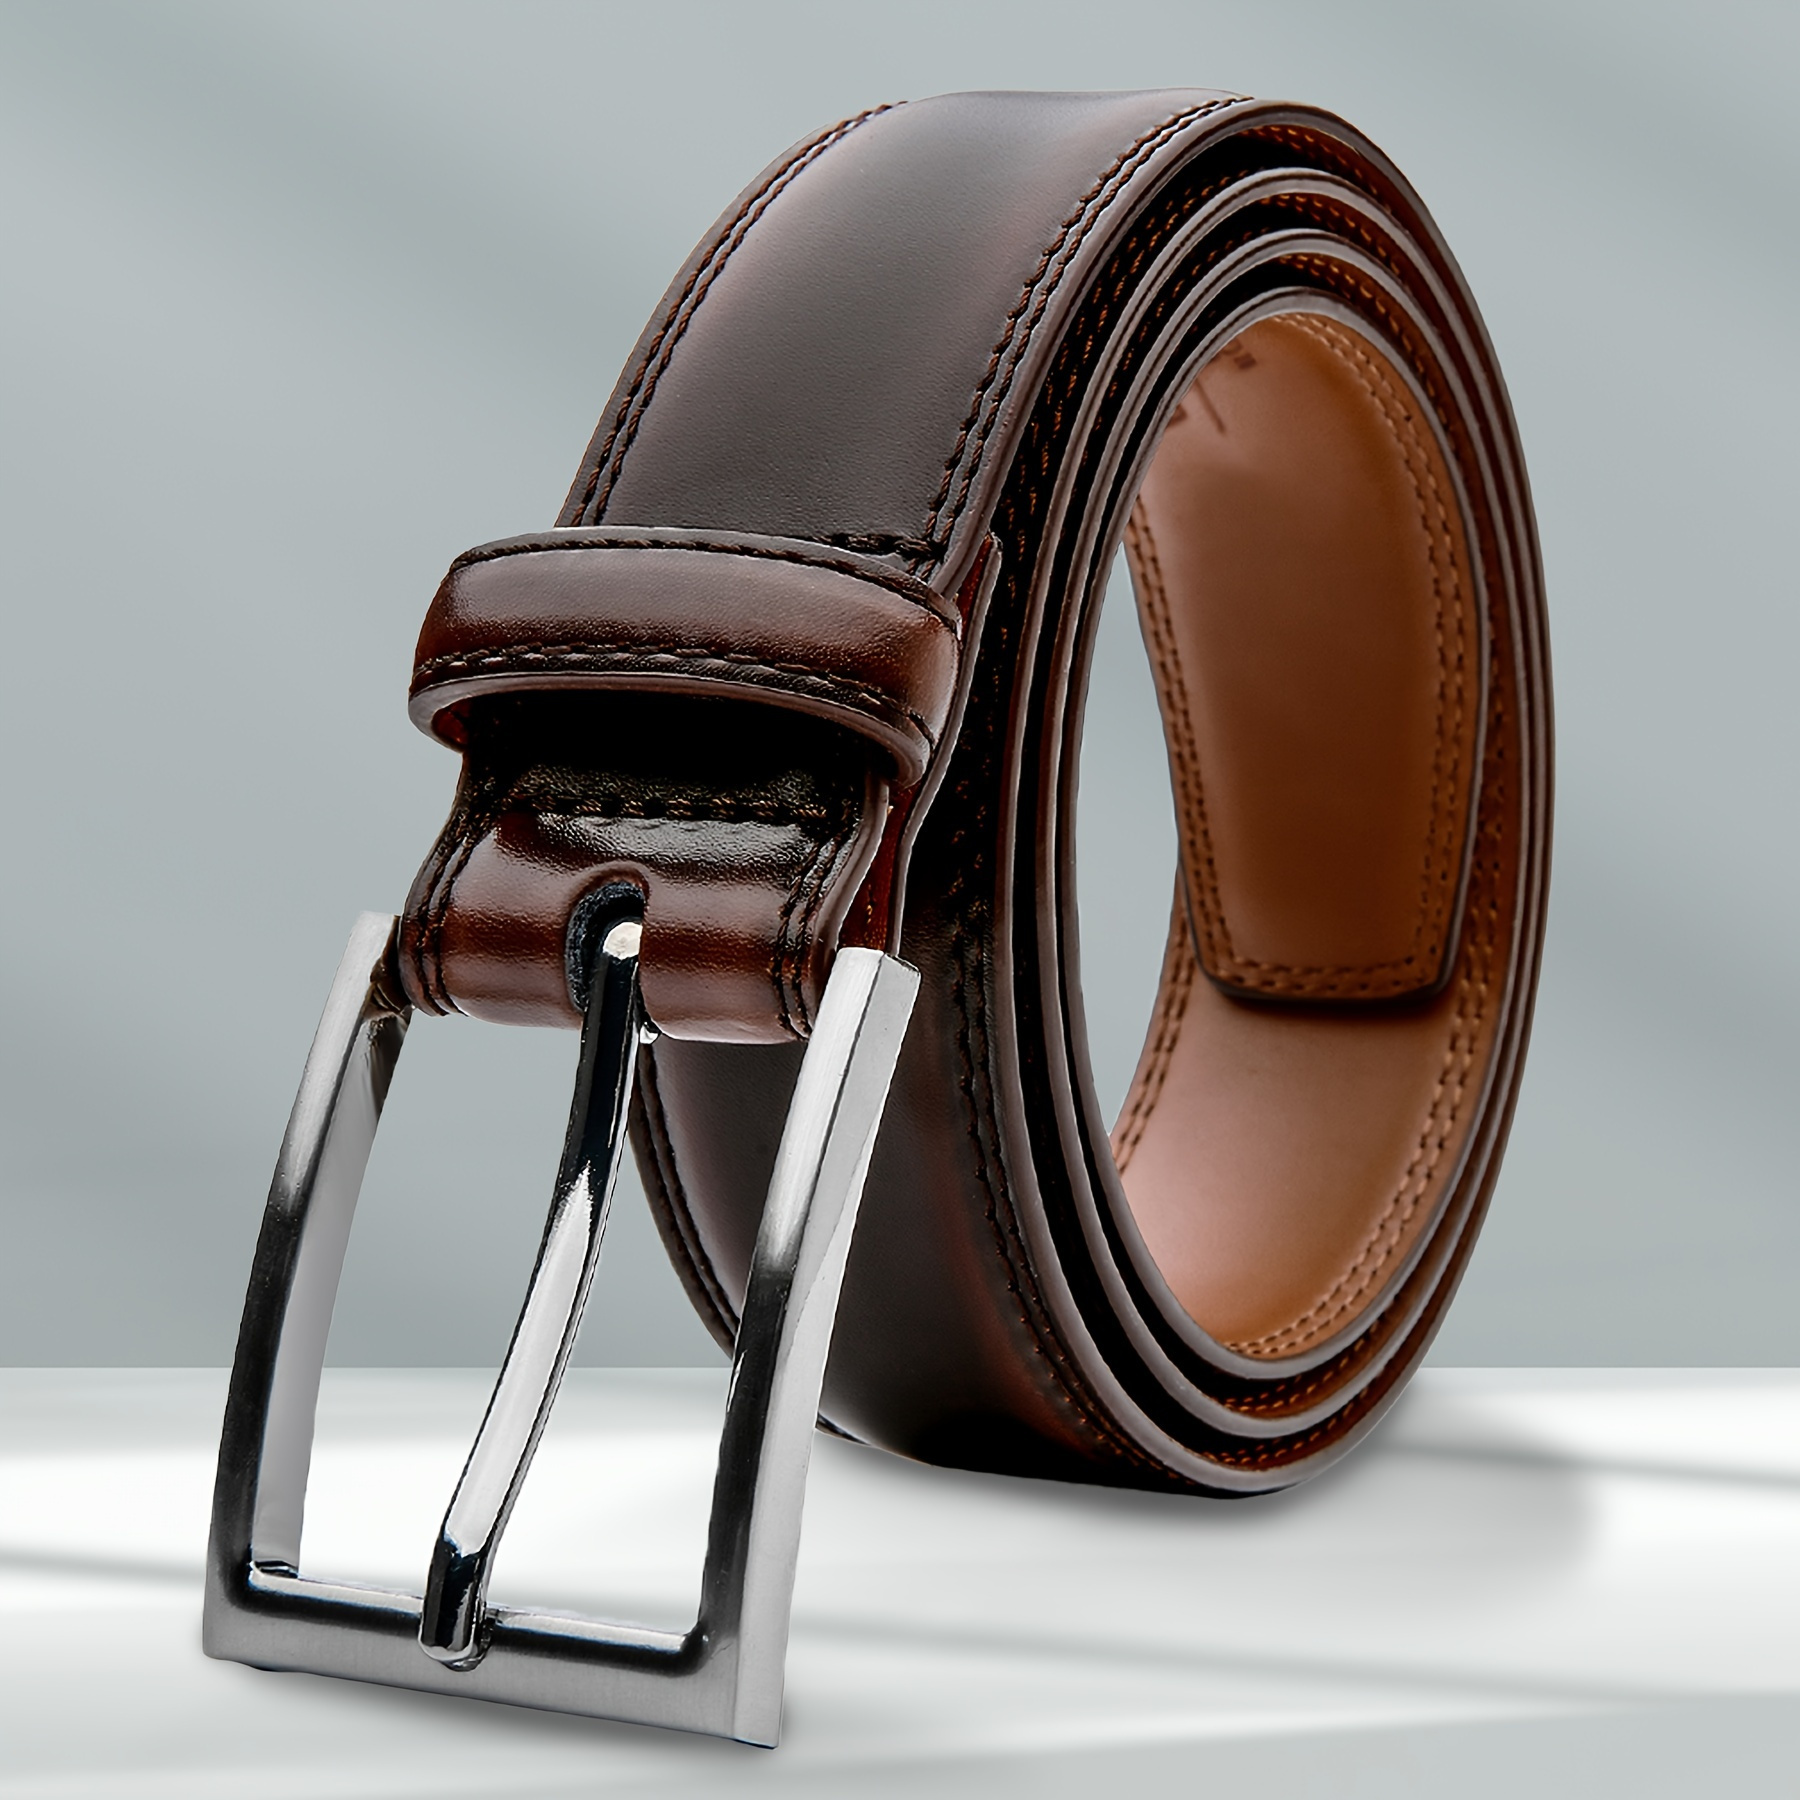 

Men's Genuine Leather Belt, Fashion & Classic Casual Belt With Single Prong Buckle For Jeans, Pants, Work And Business, Gift For Dad & Husband